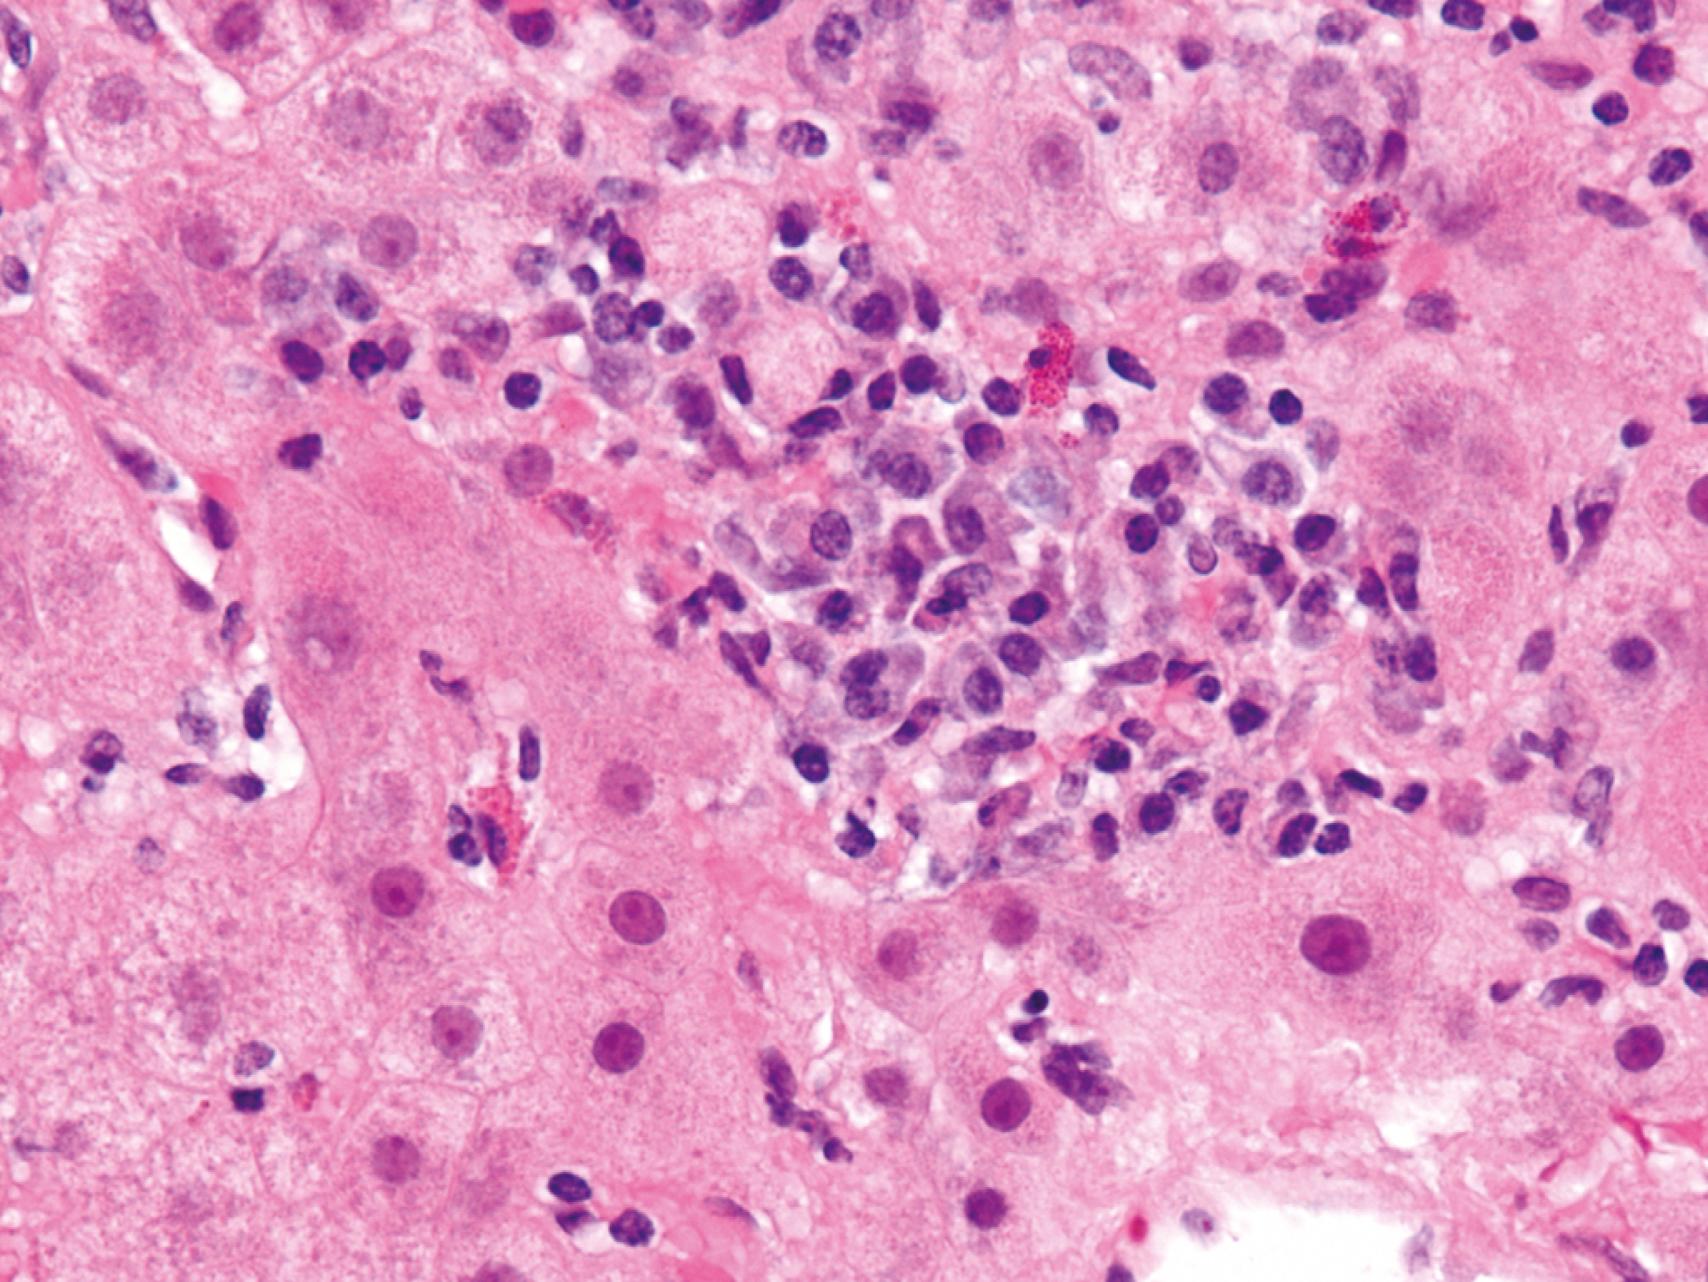 eFIG. 14.1, Autoimmune hepatitis. A focus of lobular hepatitis with prominent plasma cells typical for this disease is shown.